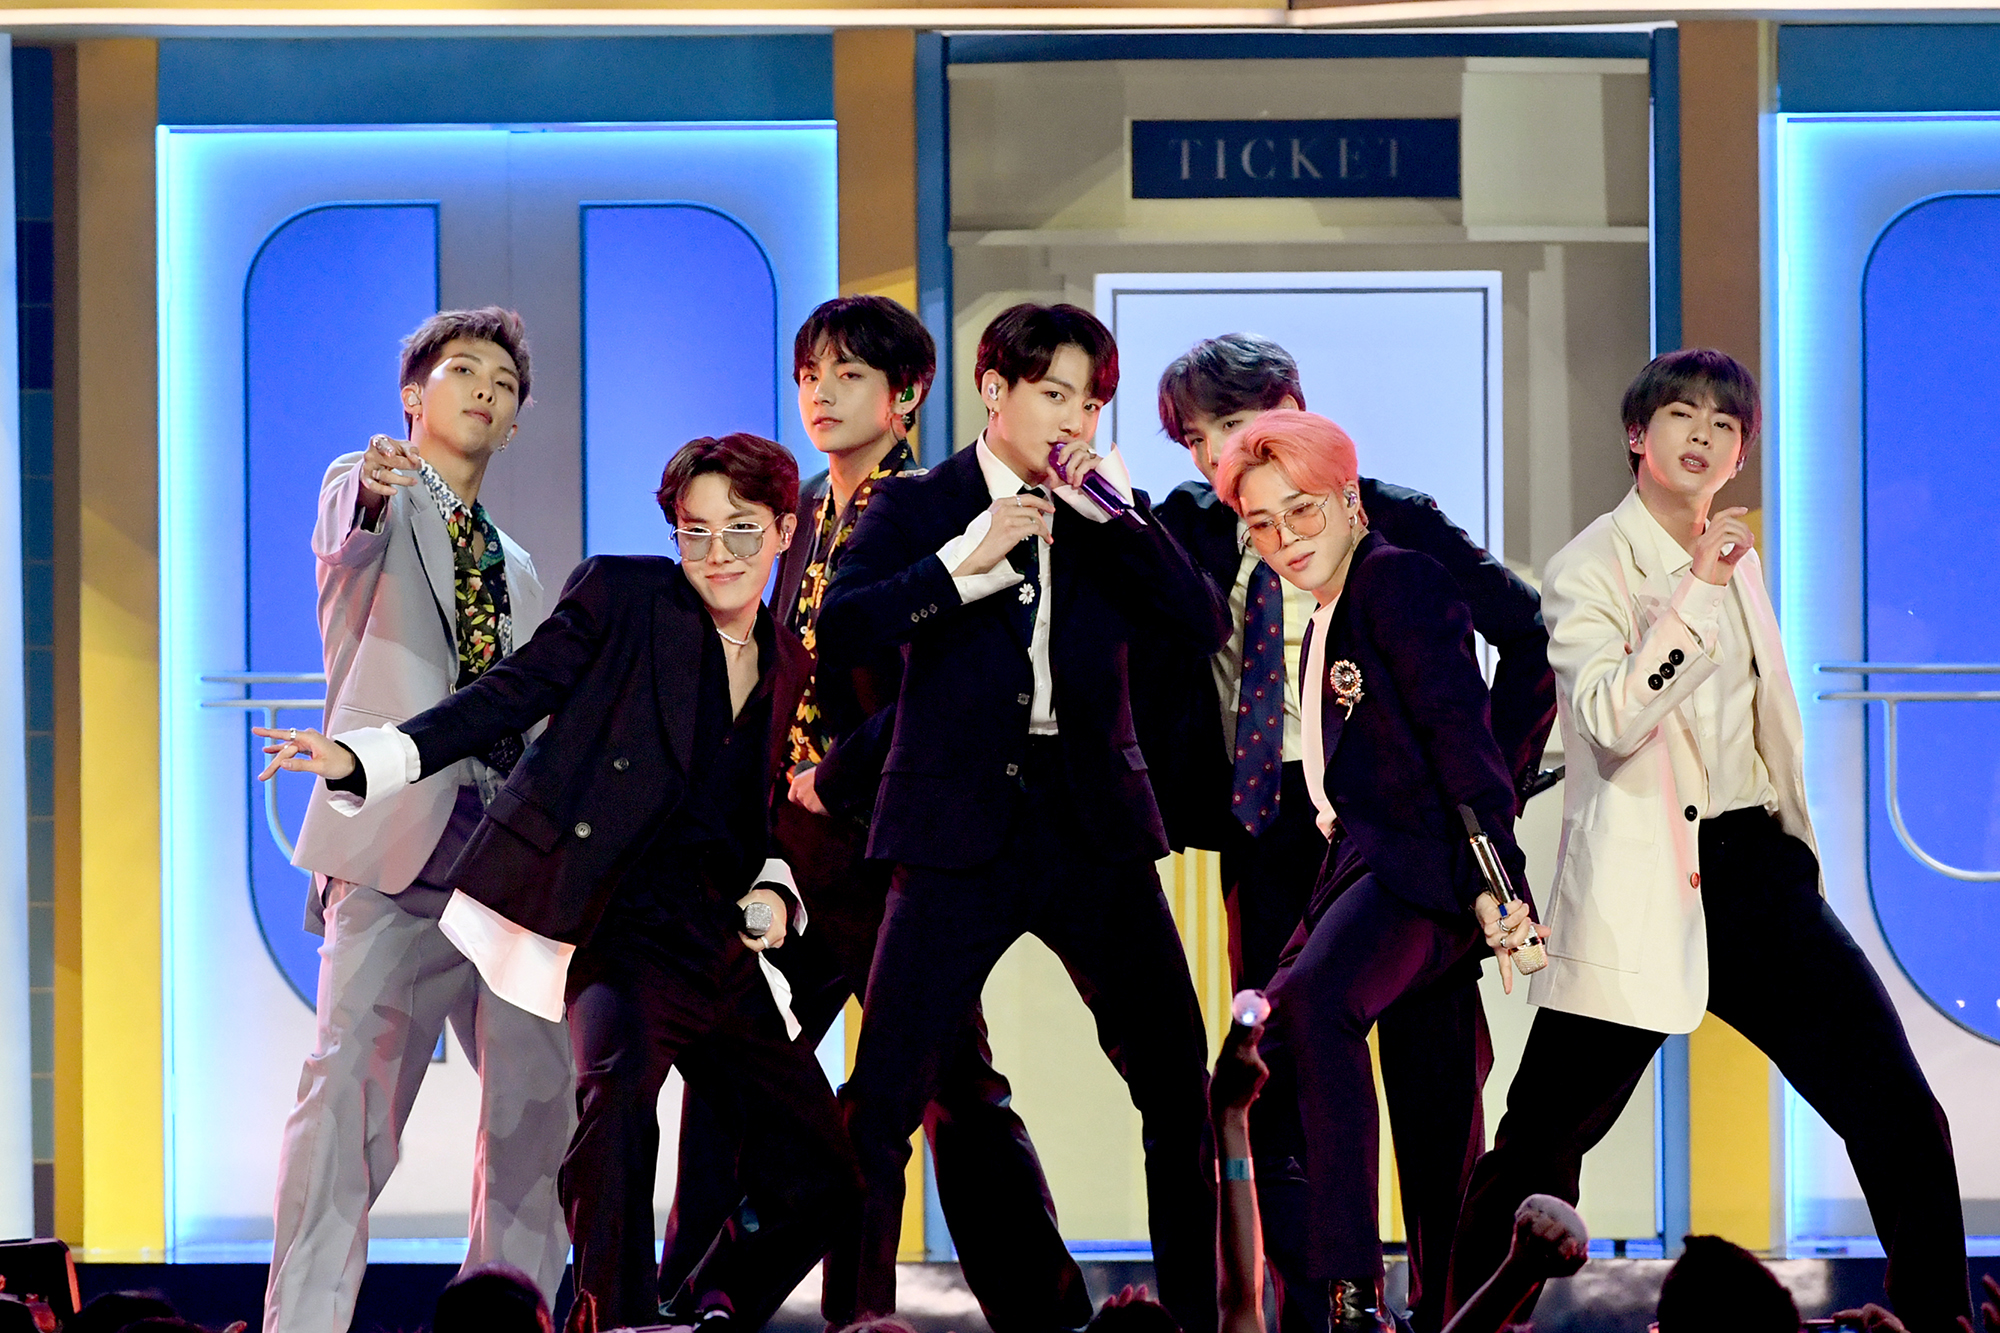 K-pop mega group BTS has signed a new deal with Universal Music Group